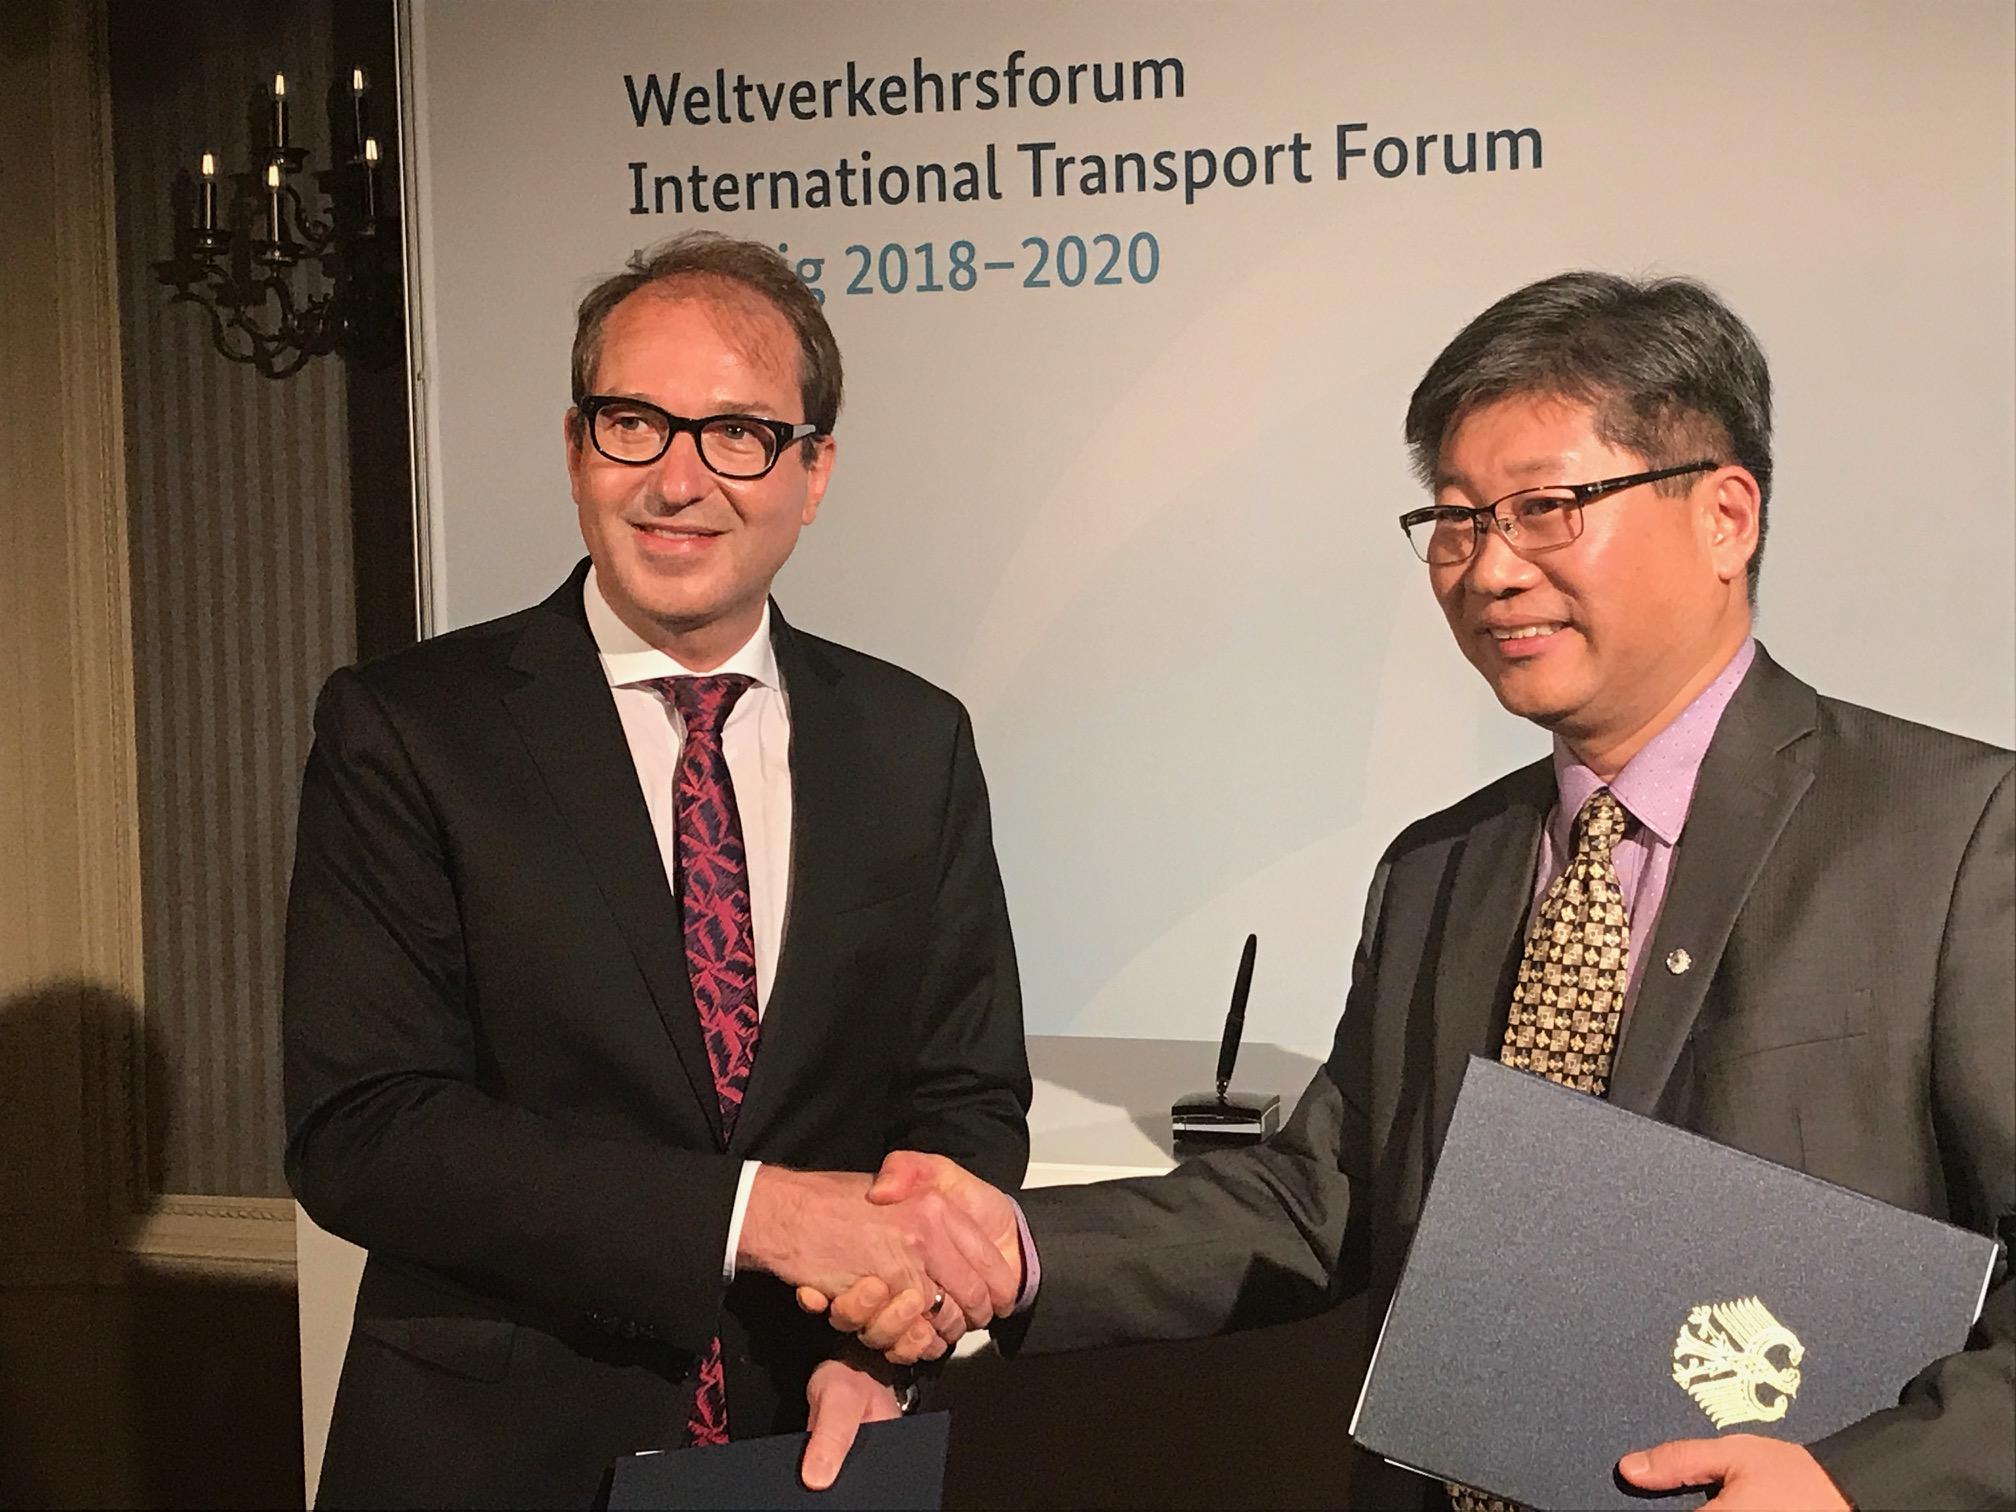 Alexander Dobrindt and Young Tae Kim shalke hands after siging t a gant agreement to hold the Annual Summit of the International Transport Forum in Germany from 2018 through 2020